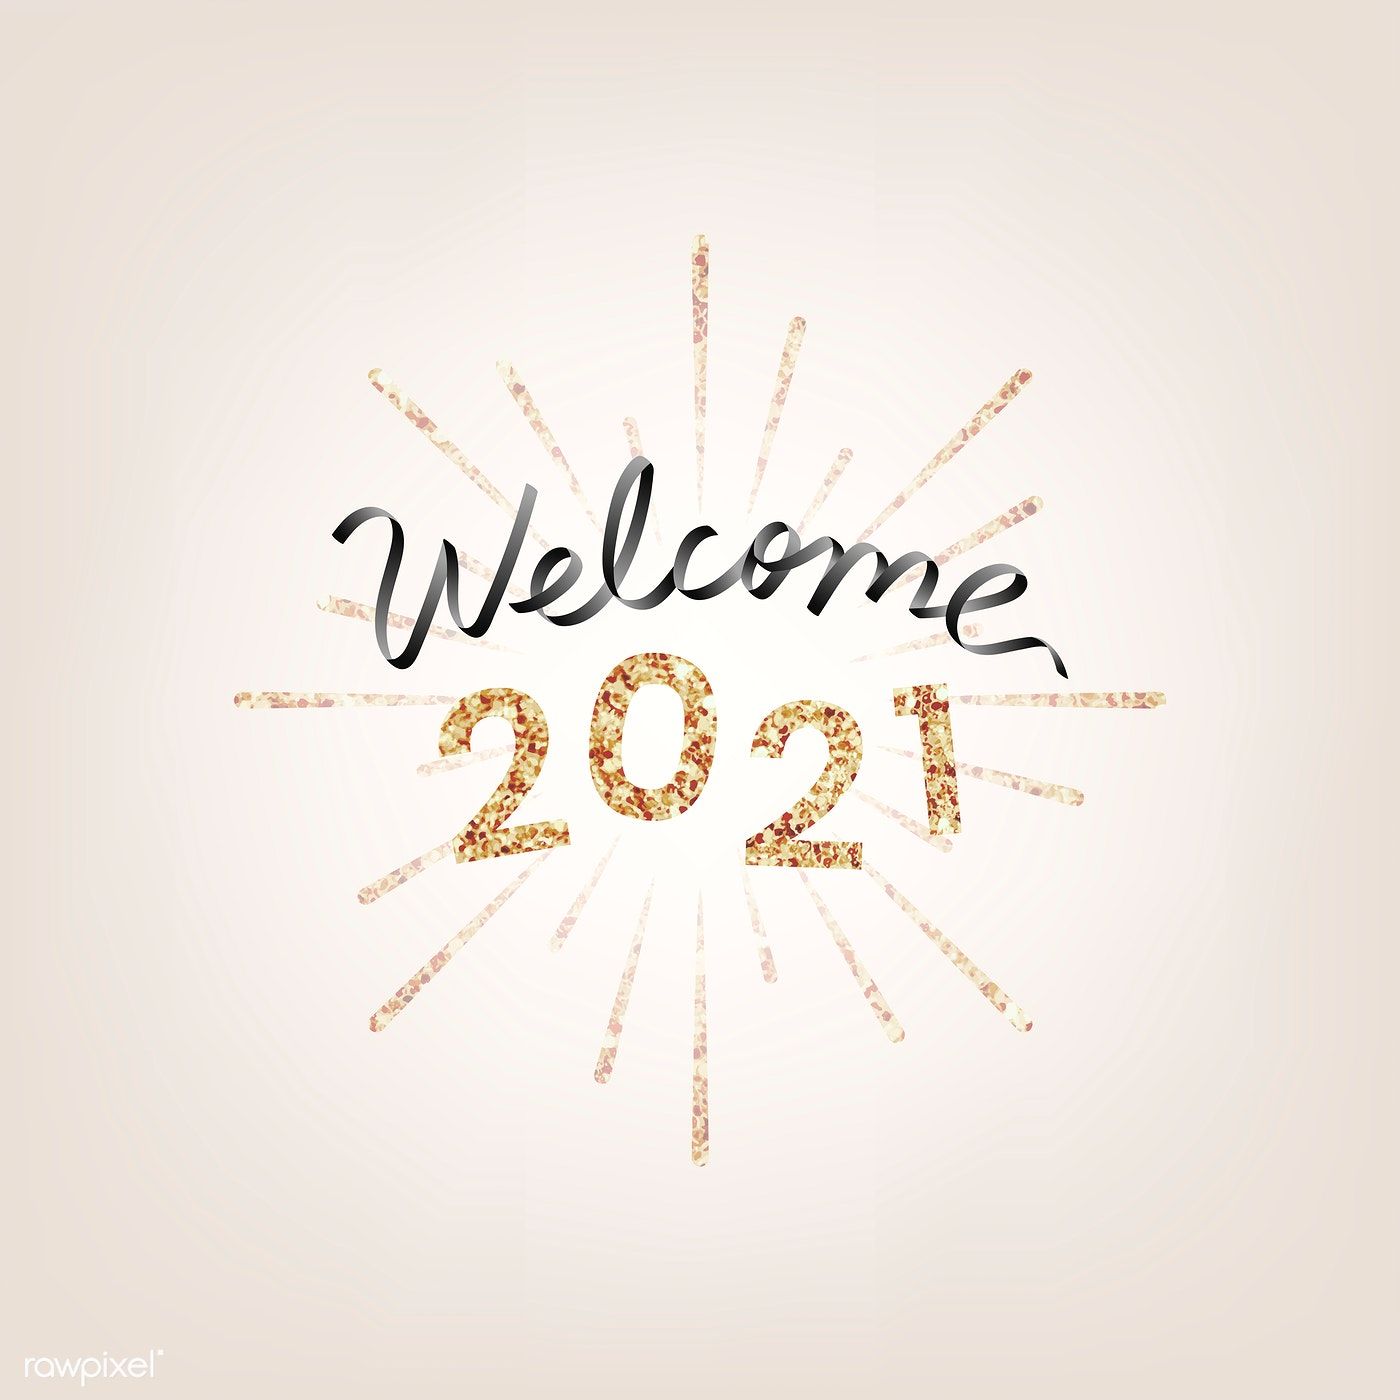 Golden festive welcome 2021 illustration. free image / NingZk V. Happy new year image, Happy new year wallpaper, New year wishes